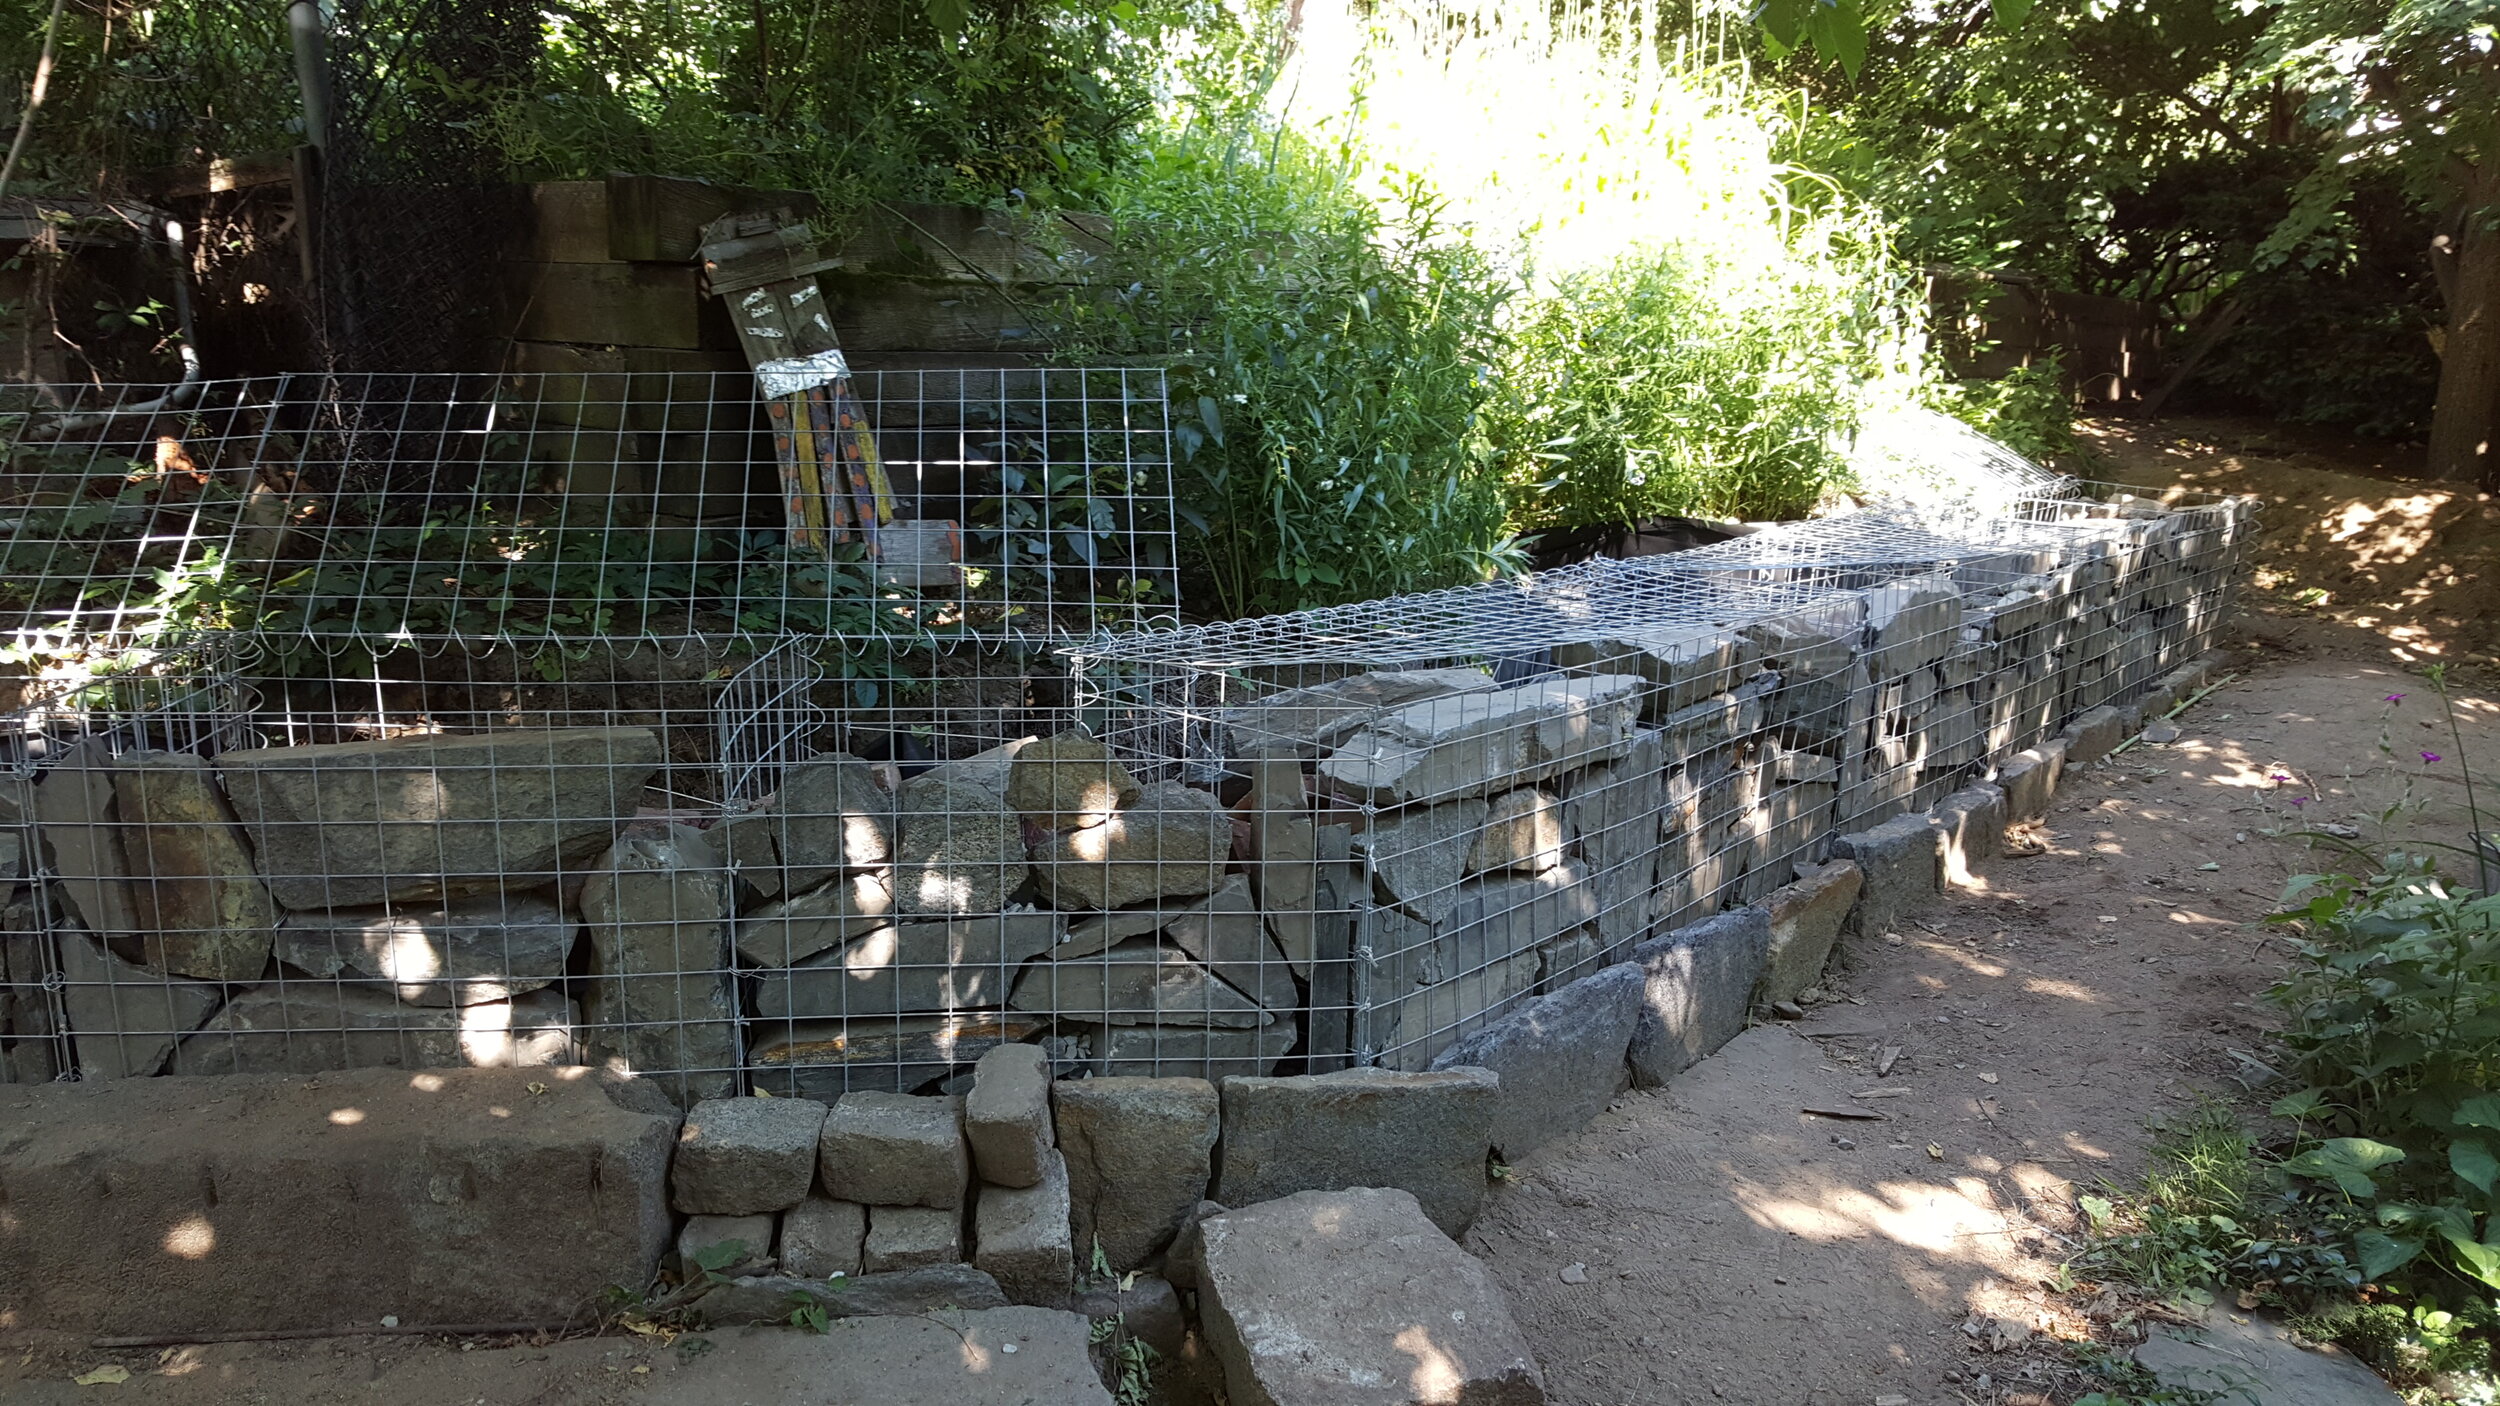 Site clean up strategy - Using site waste to fill the gabion cages